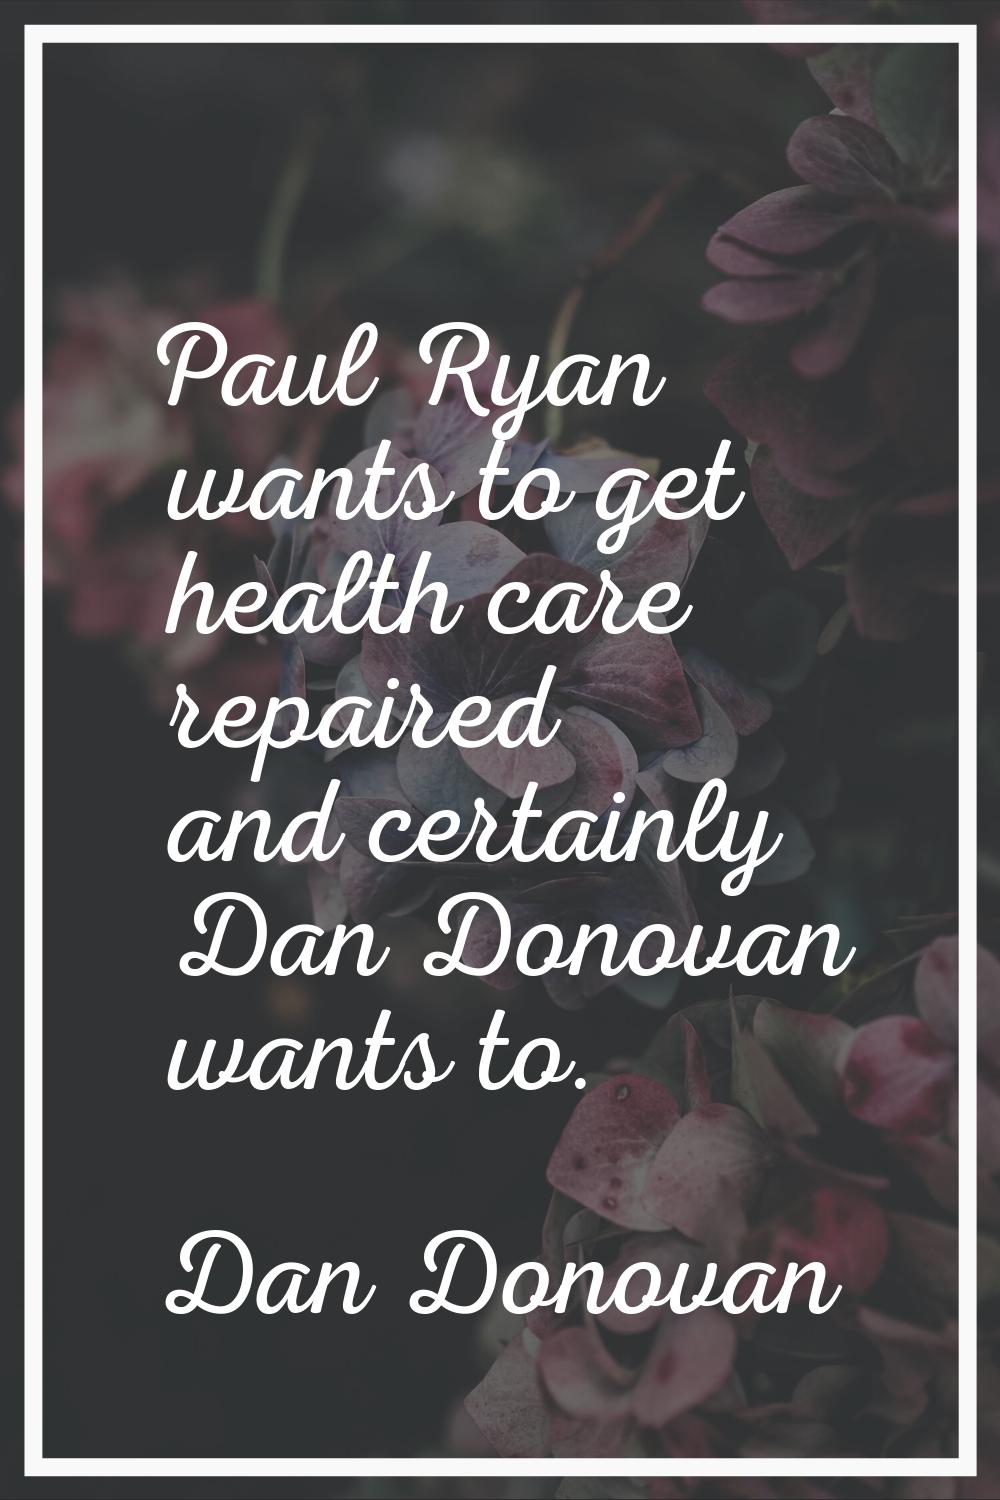 Paul Ryan wants to get health care repaired and certainly Dan Donovan wants to.